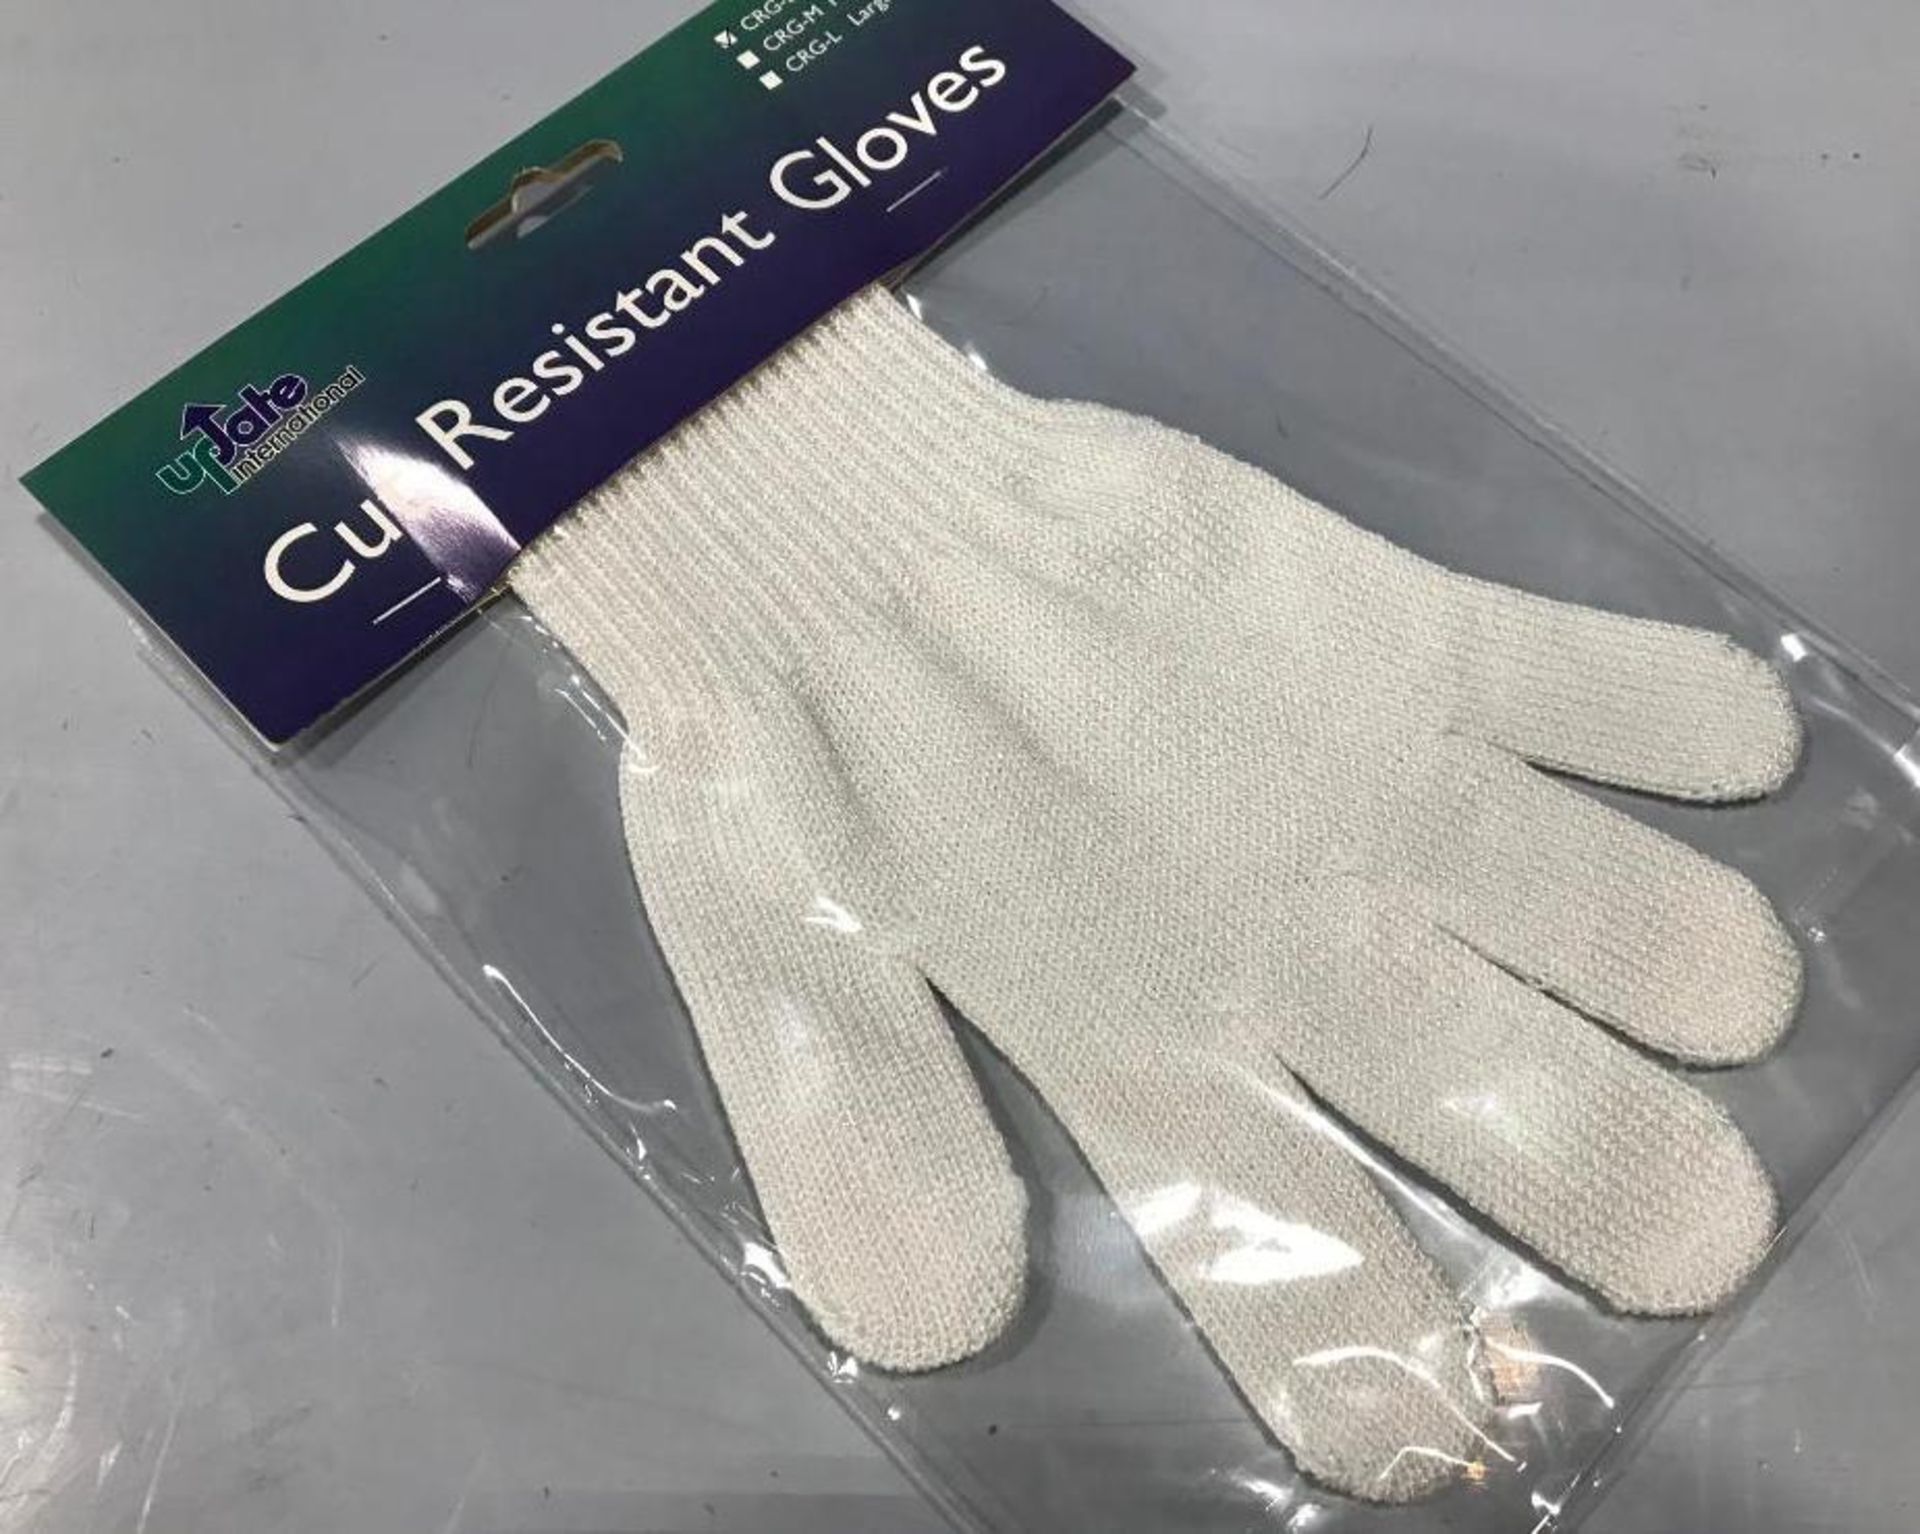 SMALL (8.75") CUT-RESISTANT GLOVE, UPDATE CRG-S - NEW